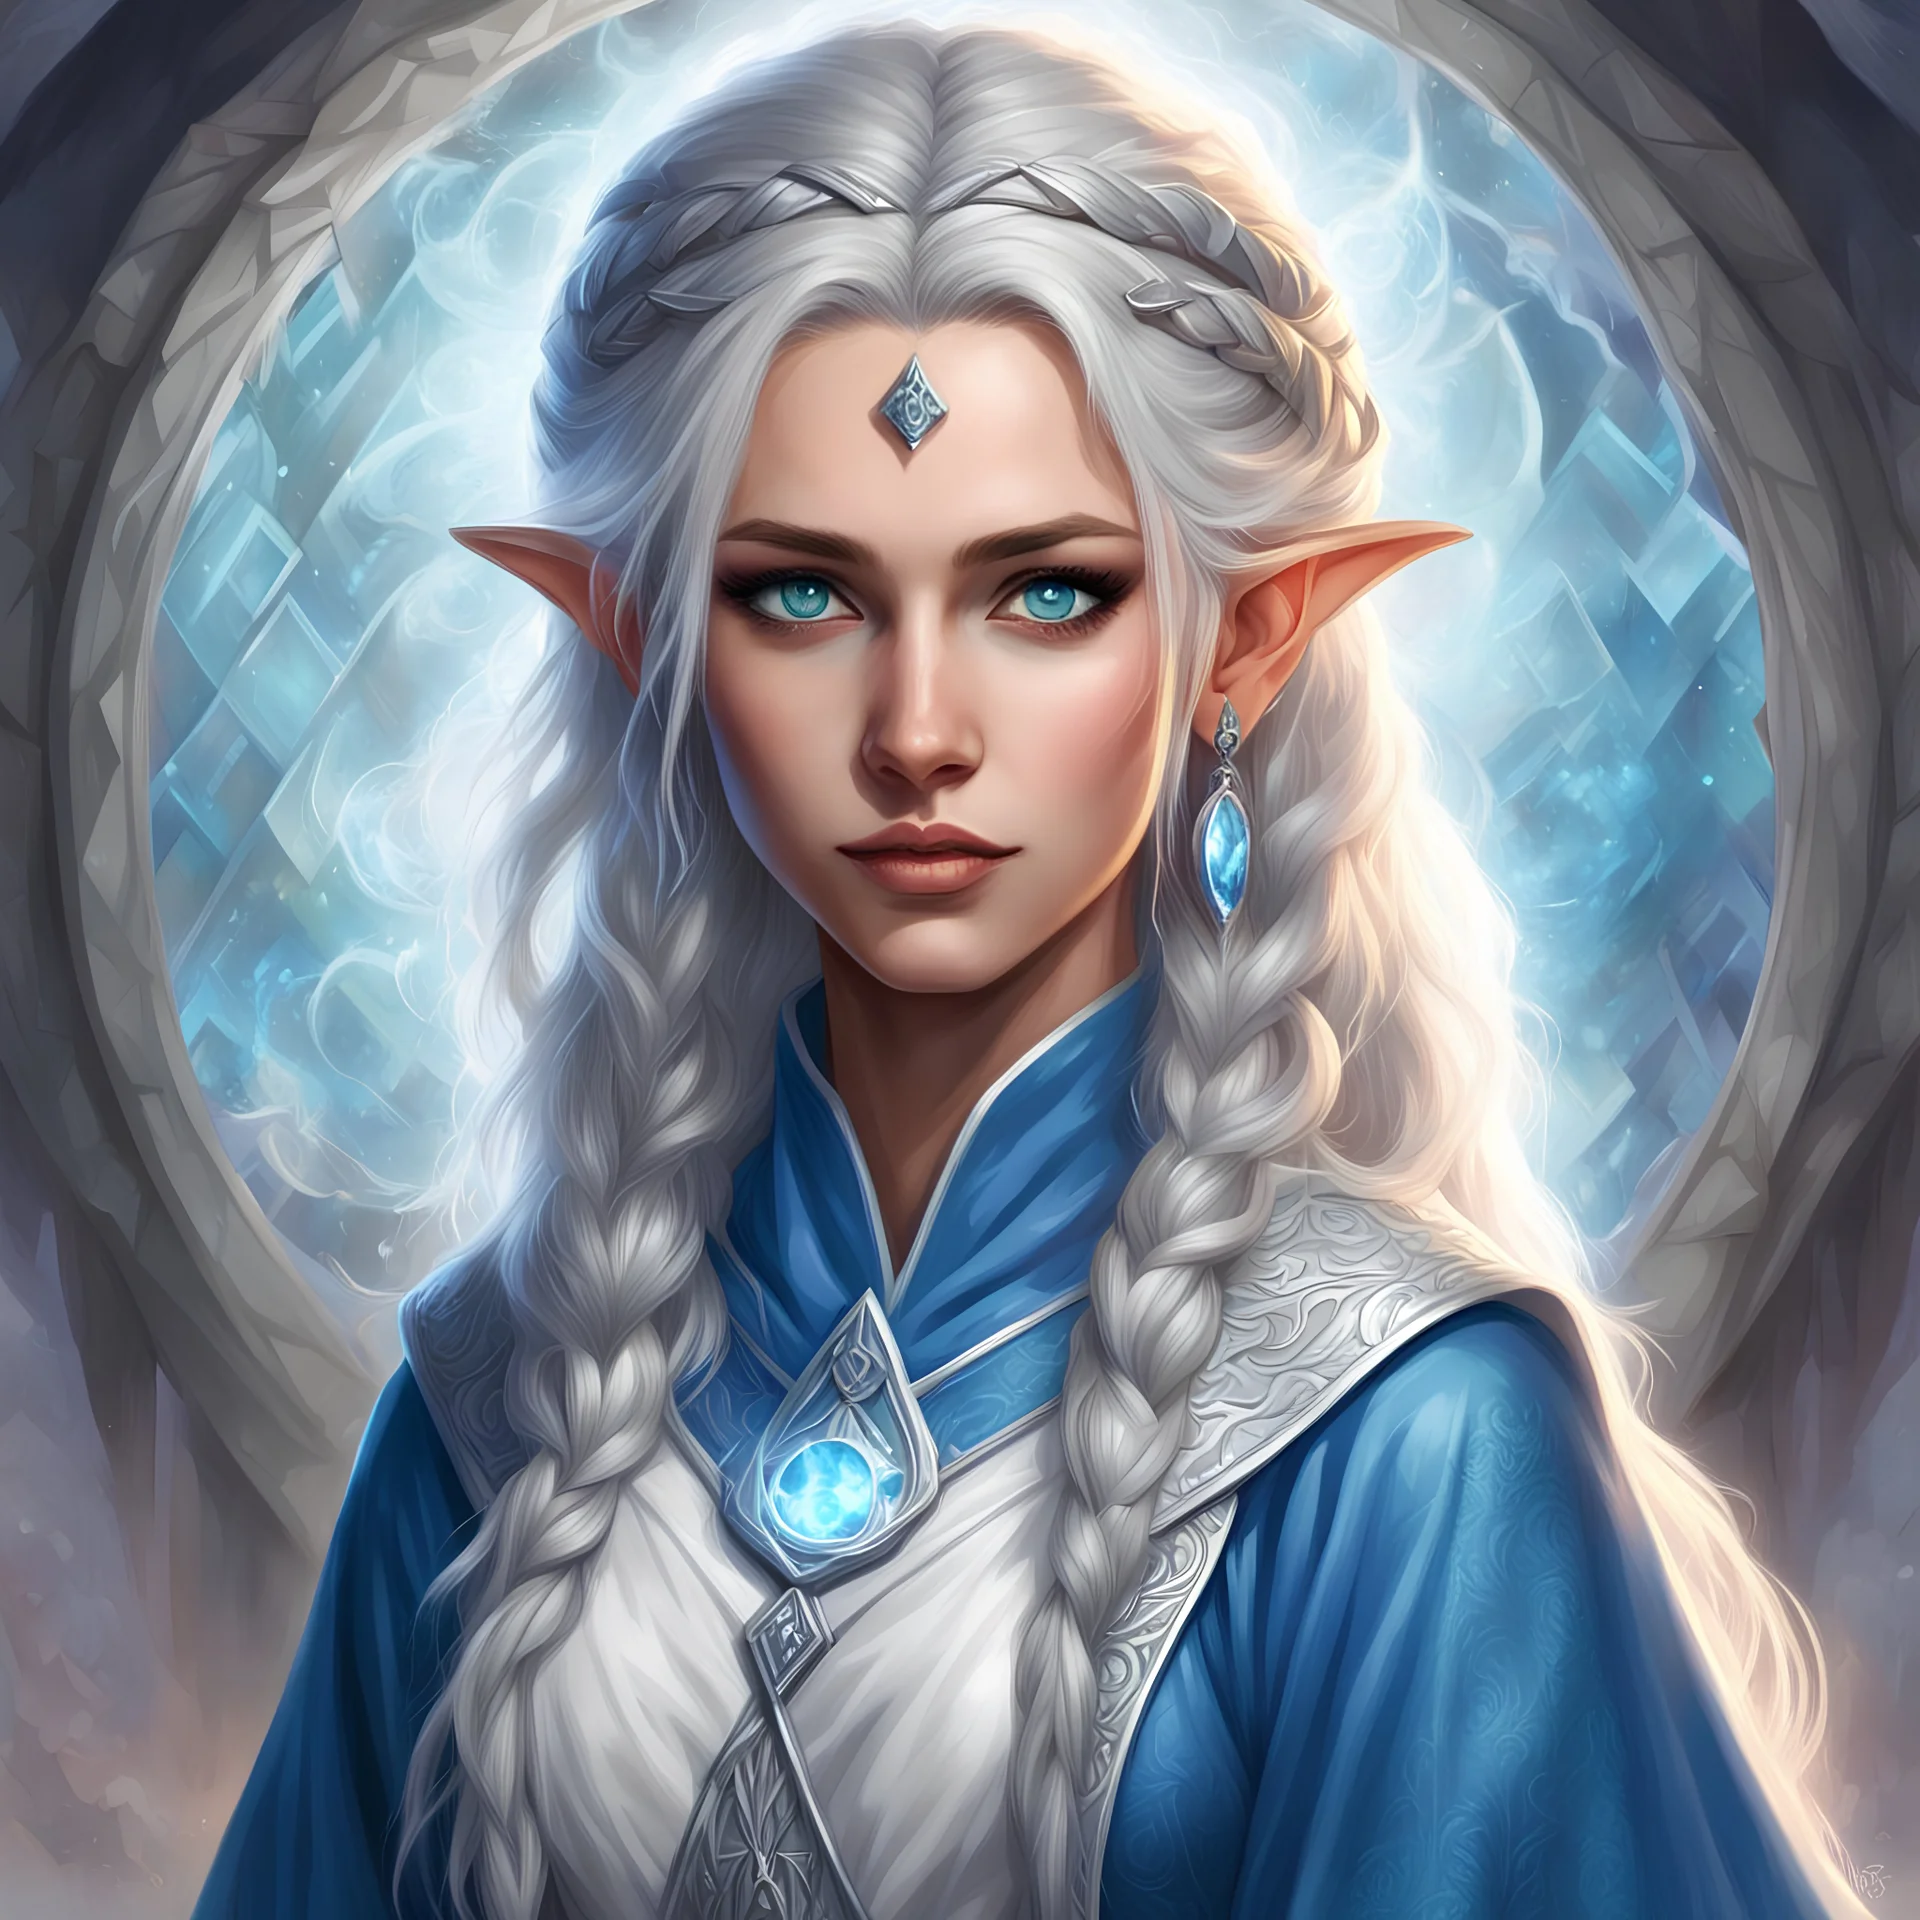 dungeons & dragons; digital art; portrait; female; sorceress; silver eyes; silver hair; braided hair; young woman; greek style robes; long veil; soft clothes; silver and blue robes; dragon scales; mage robes; half-elf; teenager; circle halo background; no jewelry; young; pretty